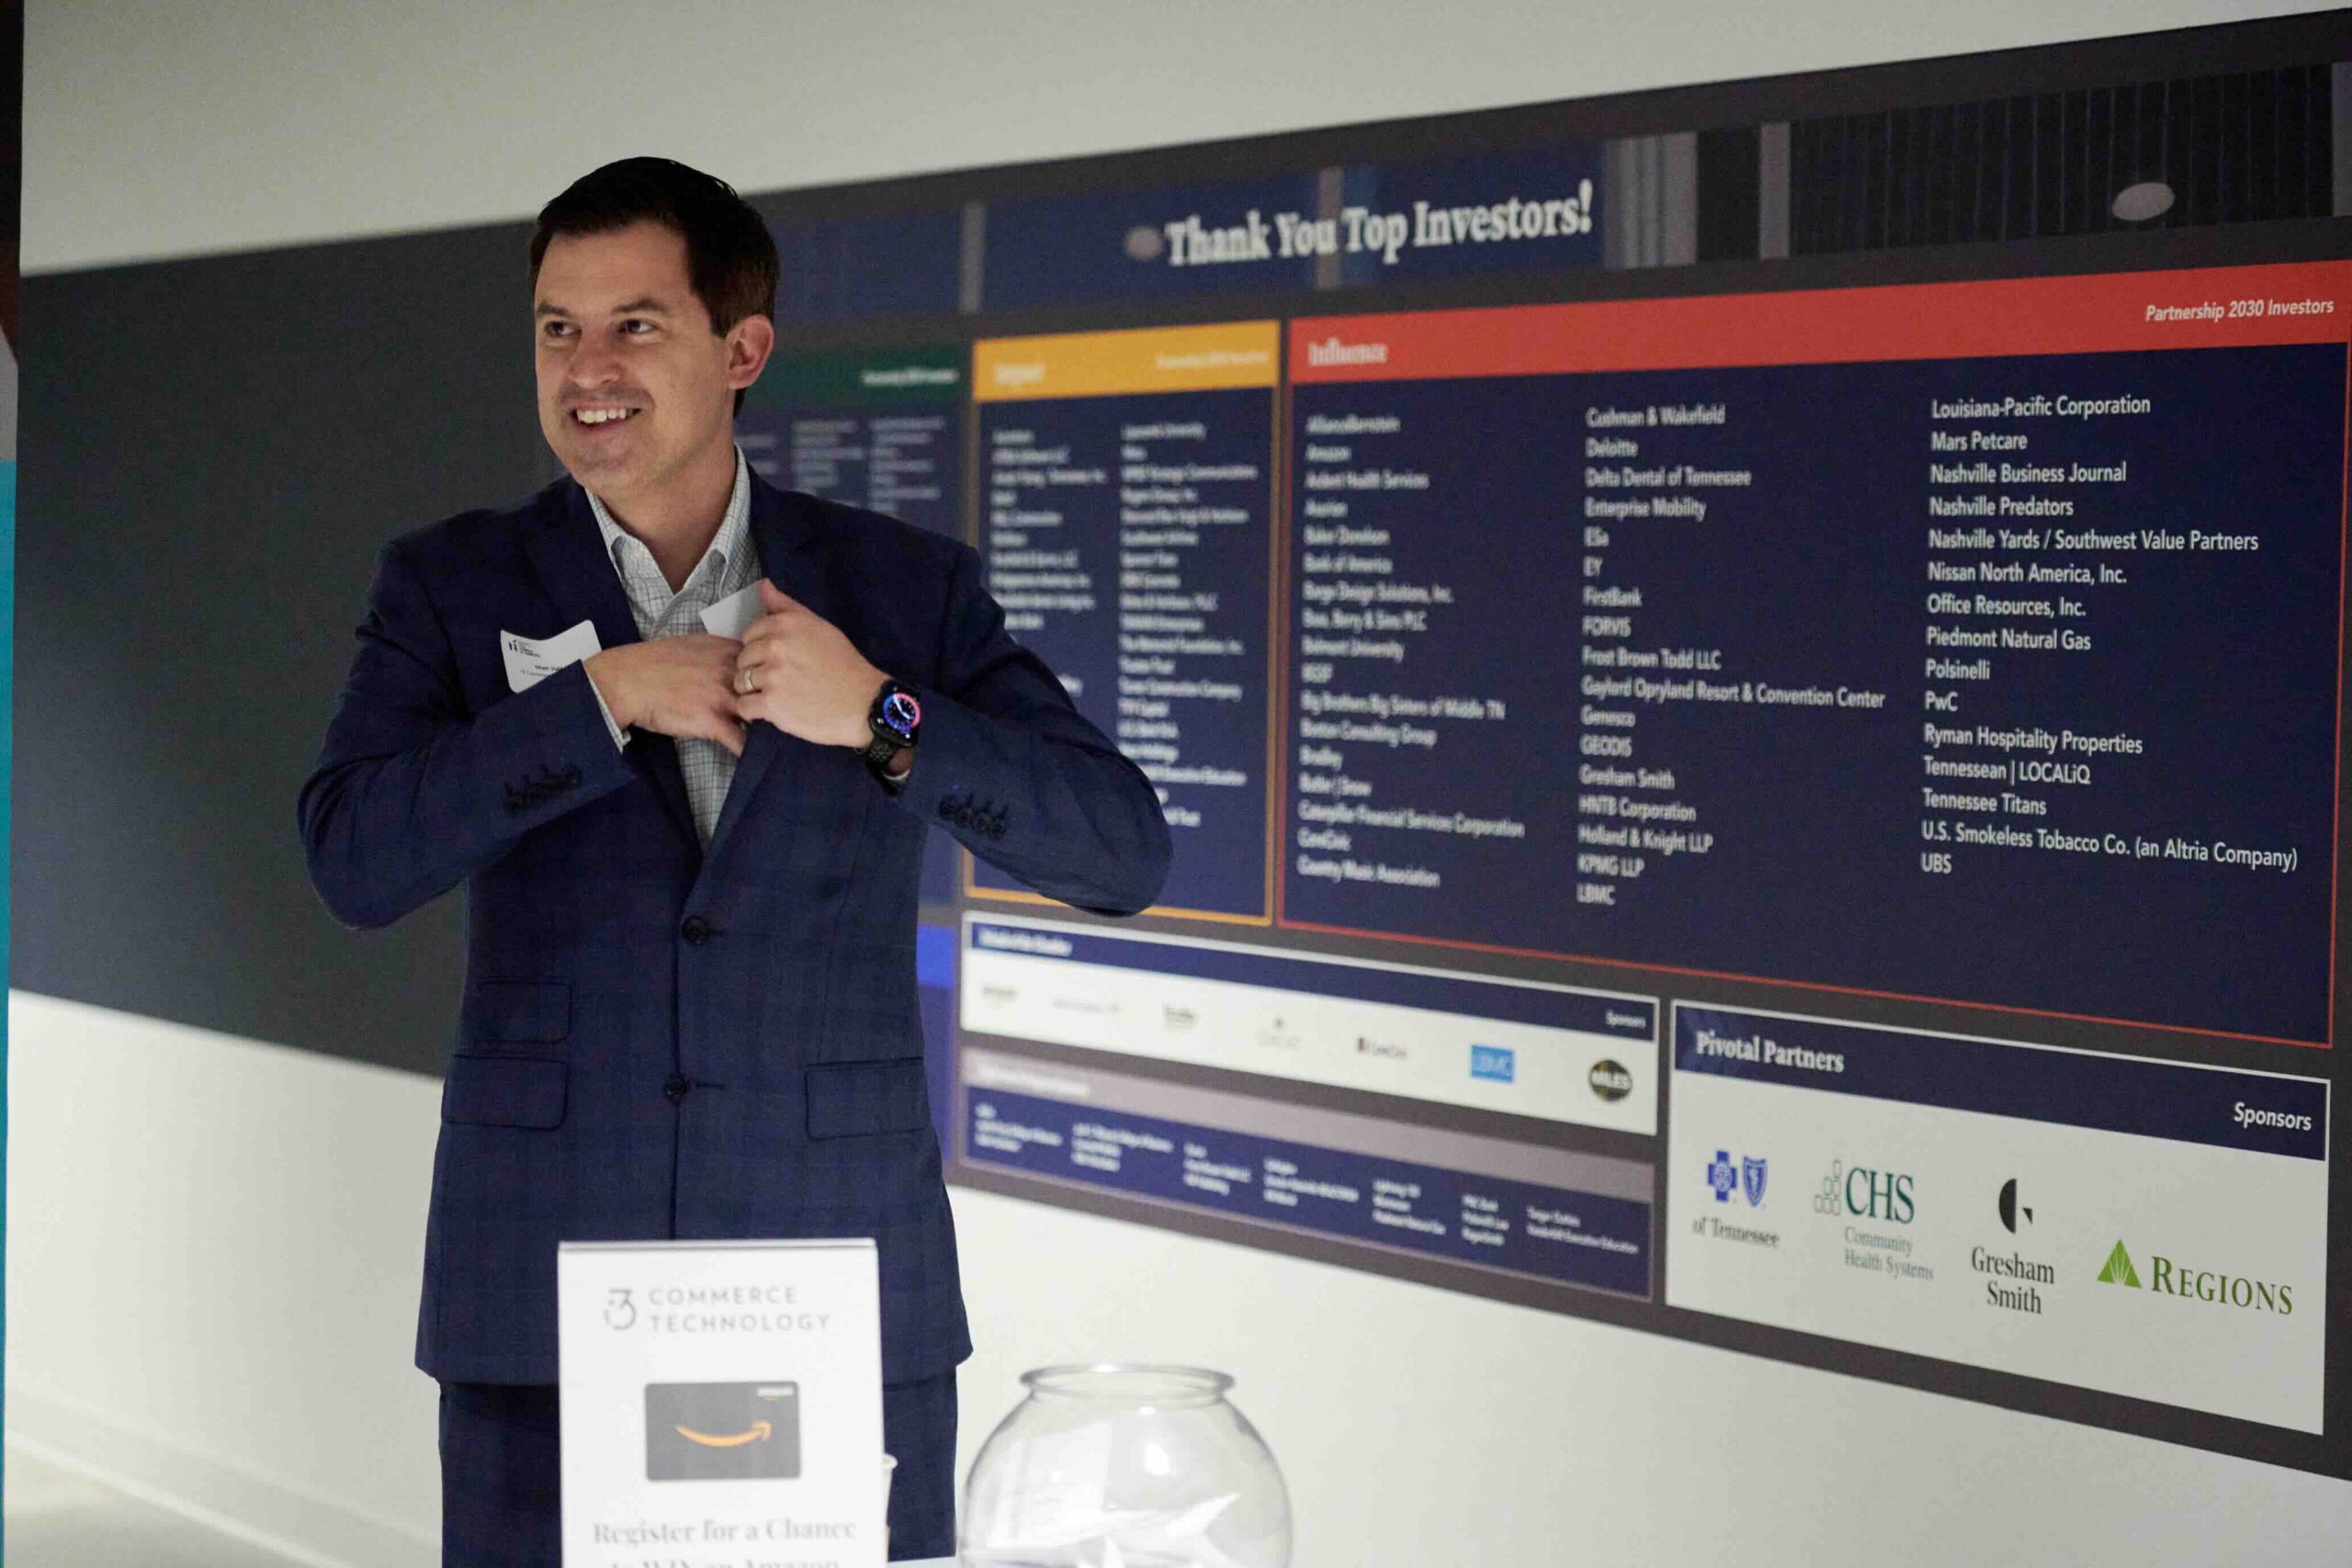 A man in a dark suit and bow tie speaking with a smile, gesturing with his hand, standing next to a sign thanking top investors at a formal event or presentation.